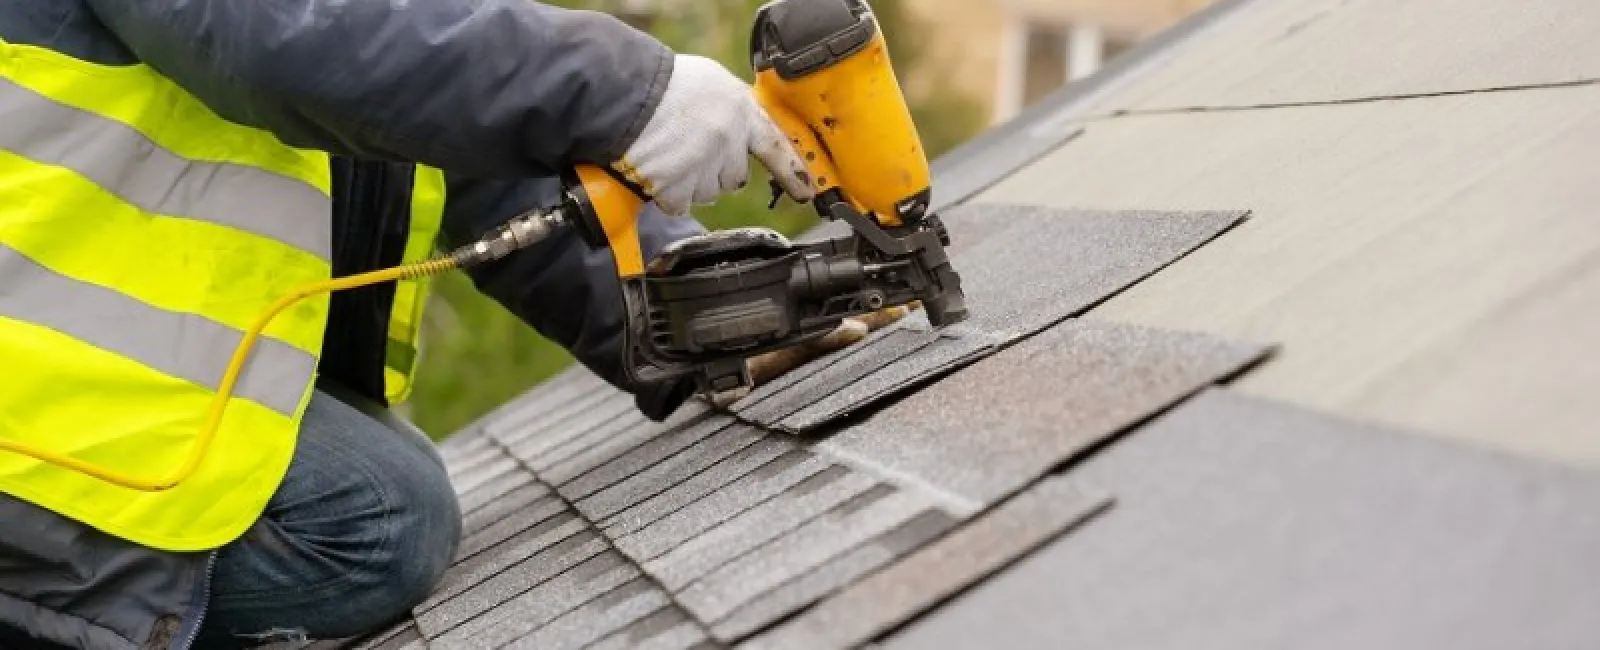 Why Roofing Repair Should Be a Priority This Year